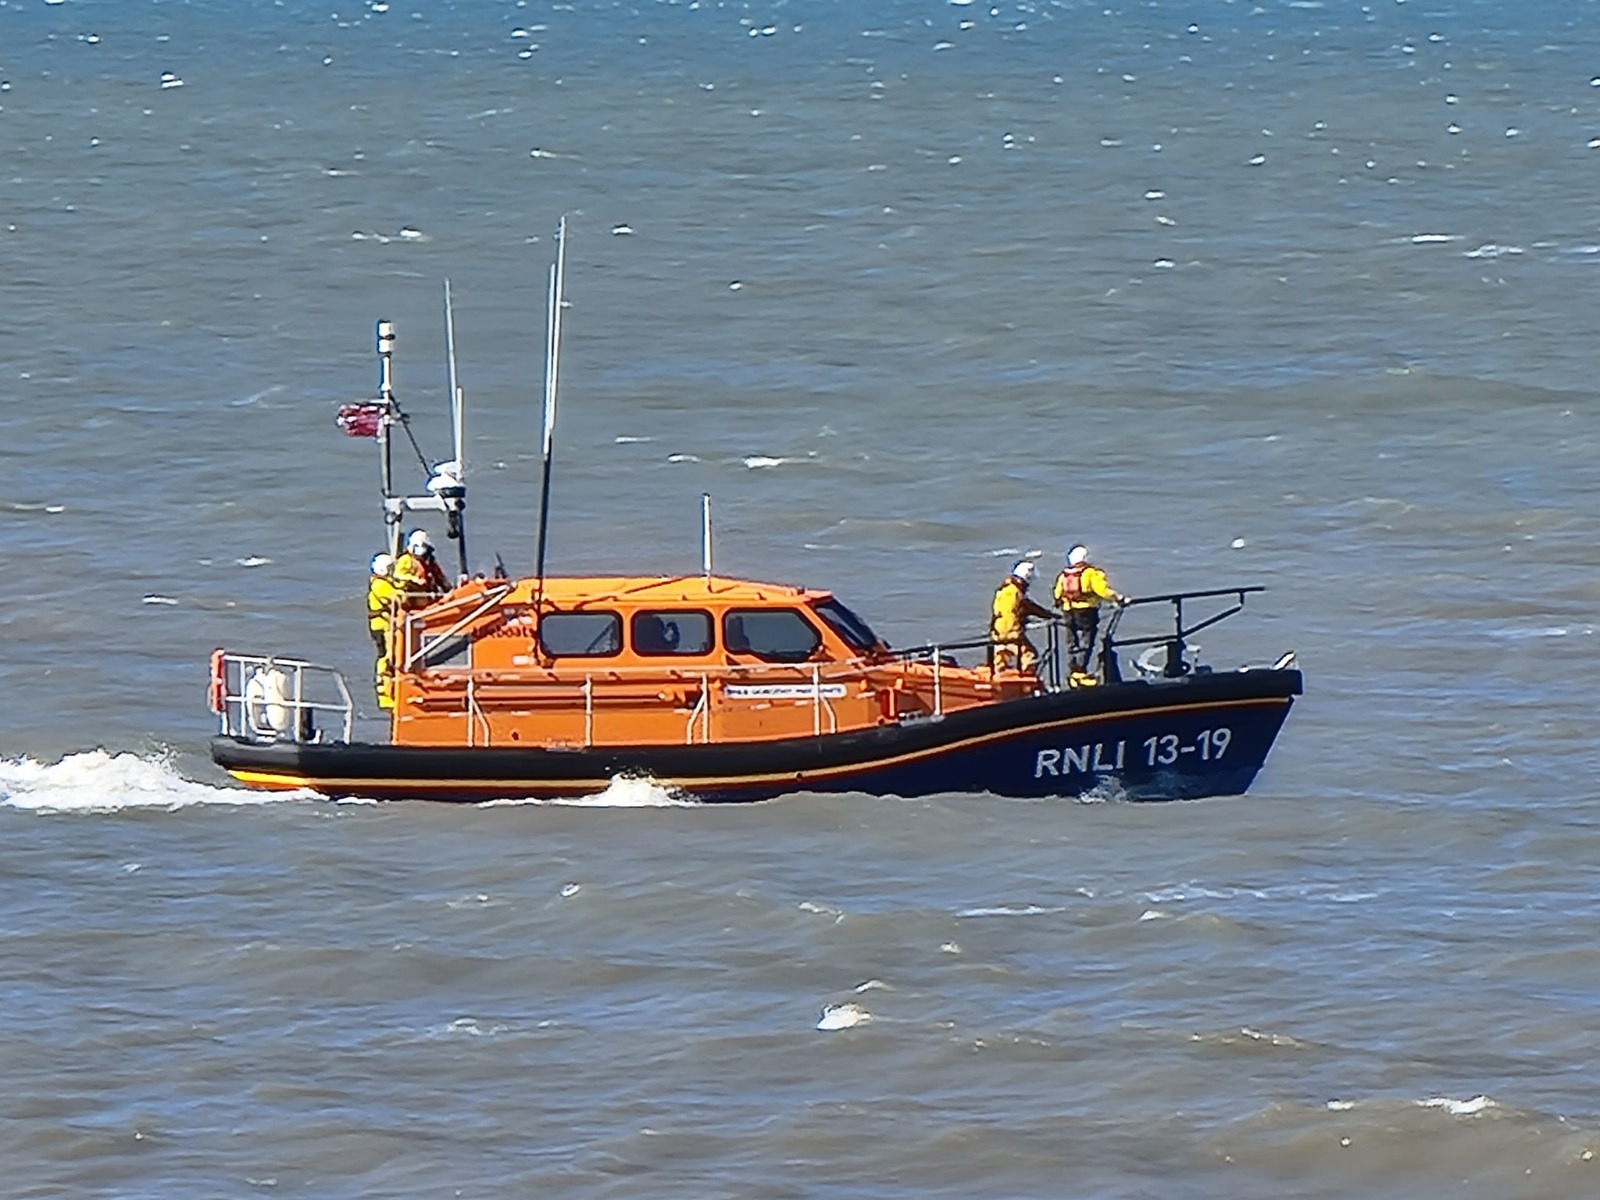 Workington RNLI volunteers were called out due to concern for a solo kite surfer